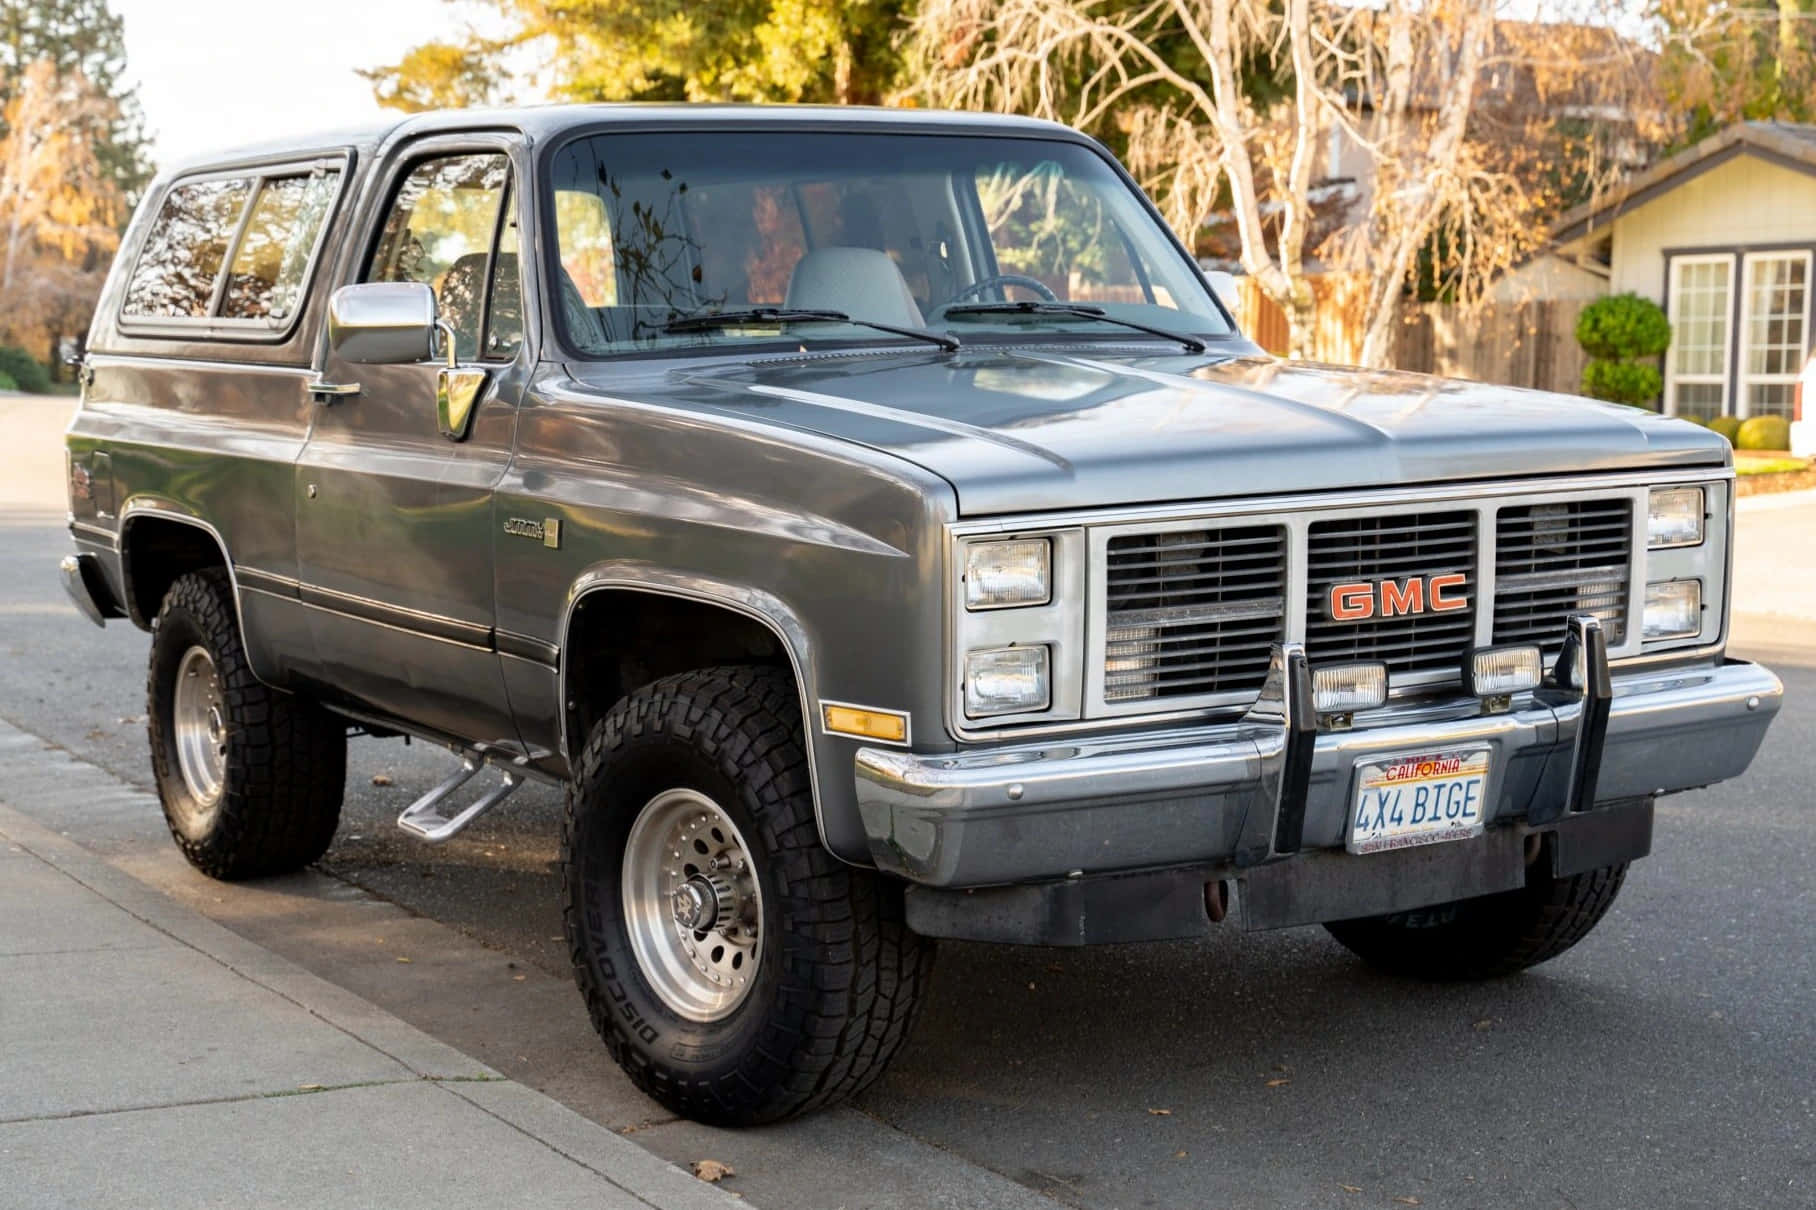 GMC Jimmy: A Rugged and Powerful SUV Wallpaper